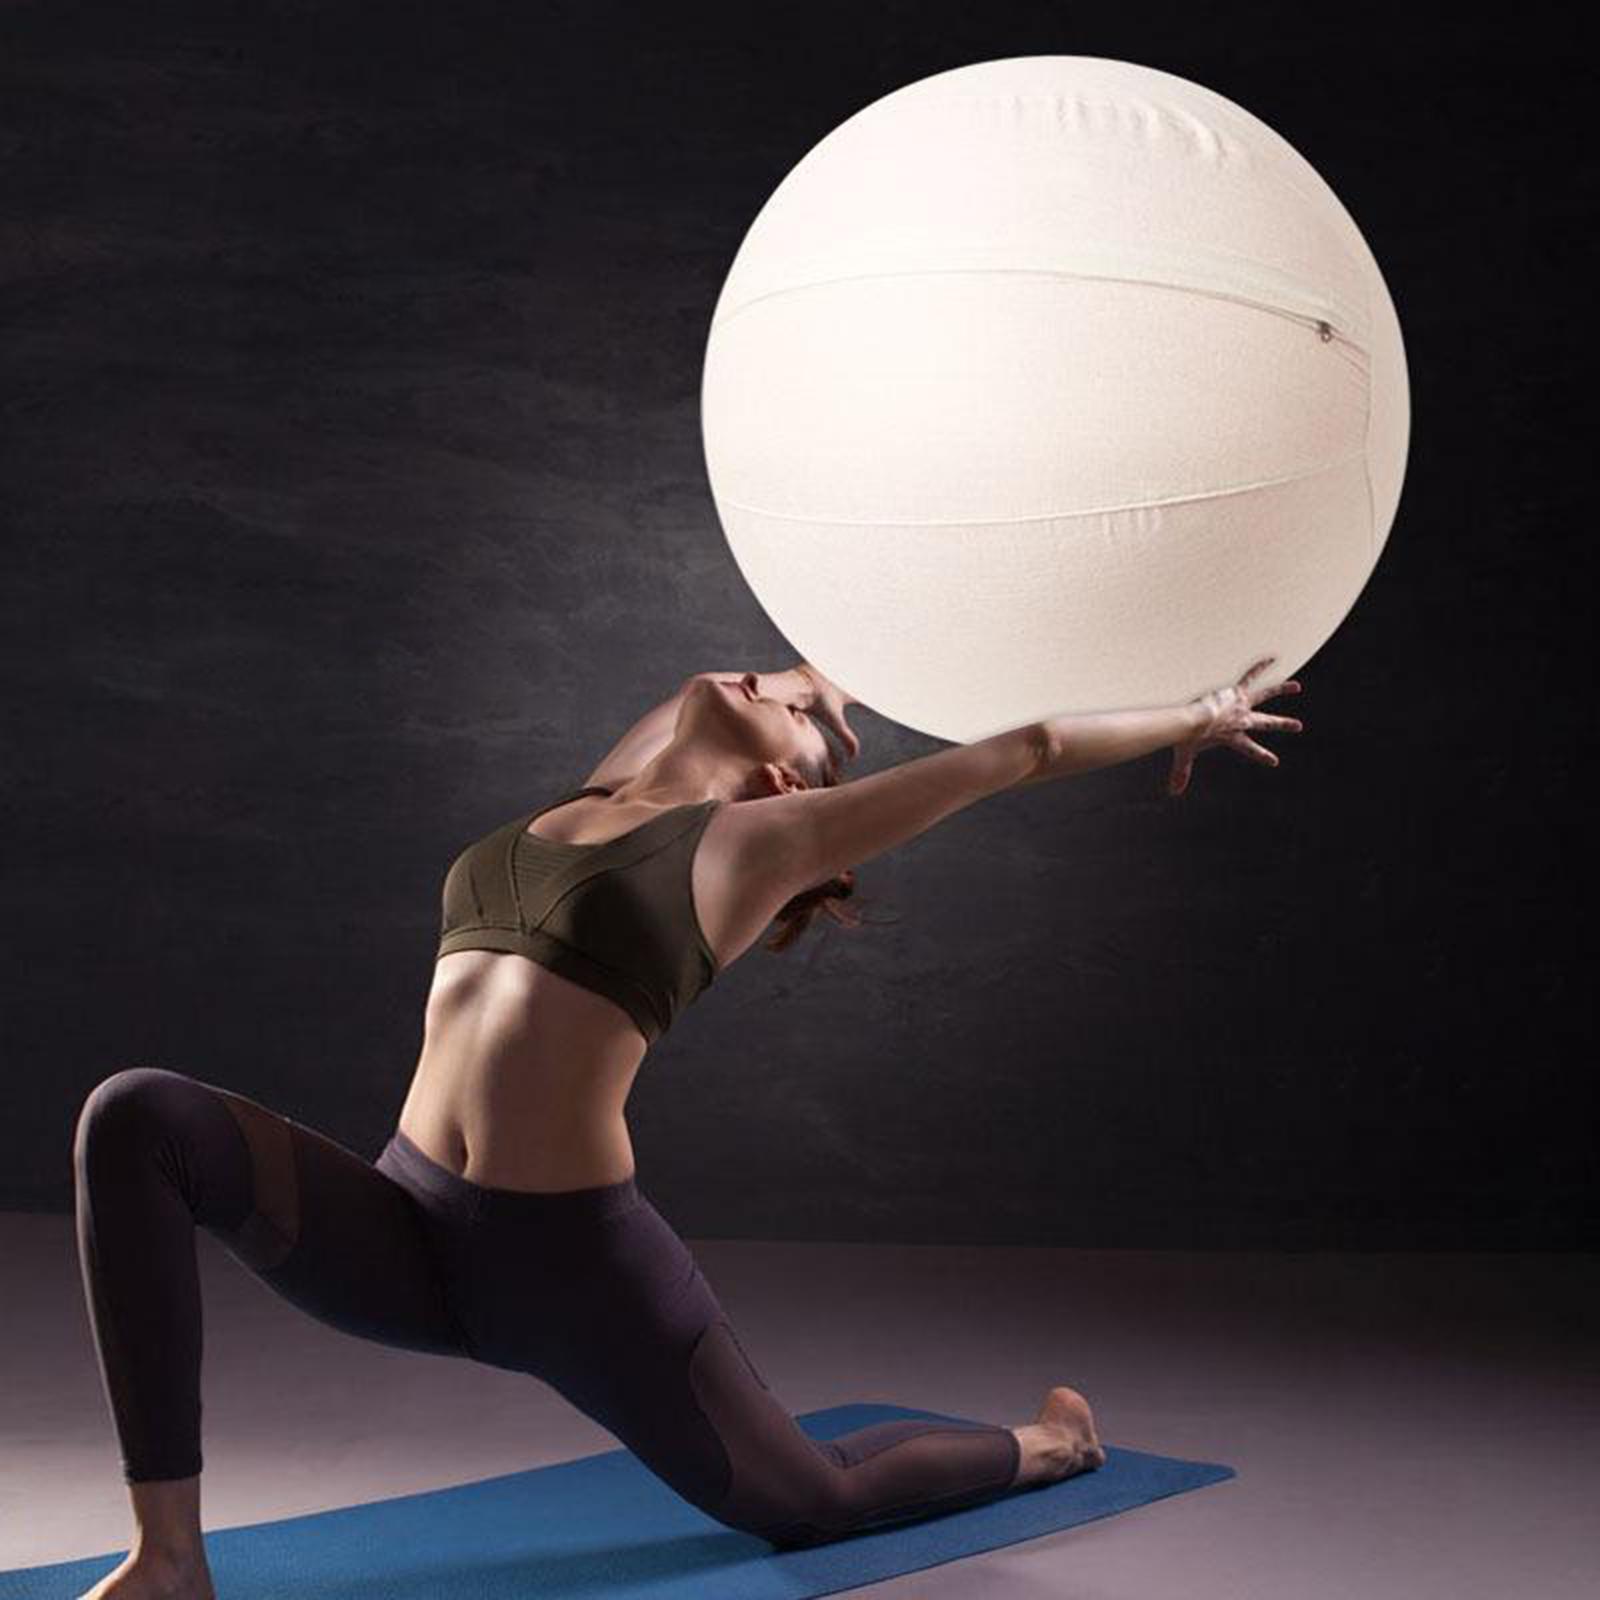 Training Ball for Home Pilates and Gym Exercise Anti-slip Cover 45cm